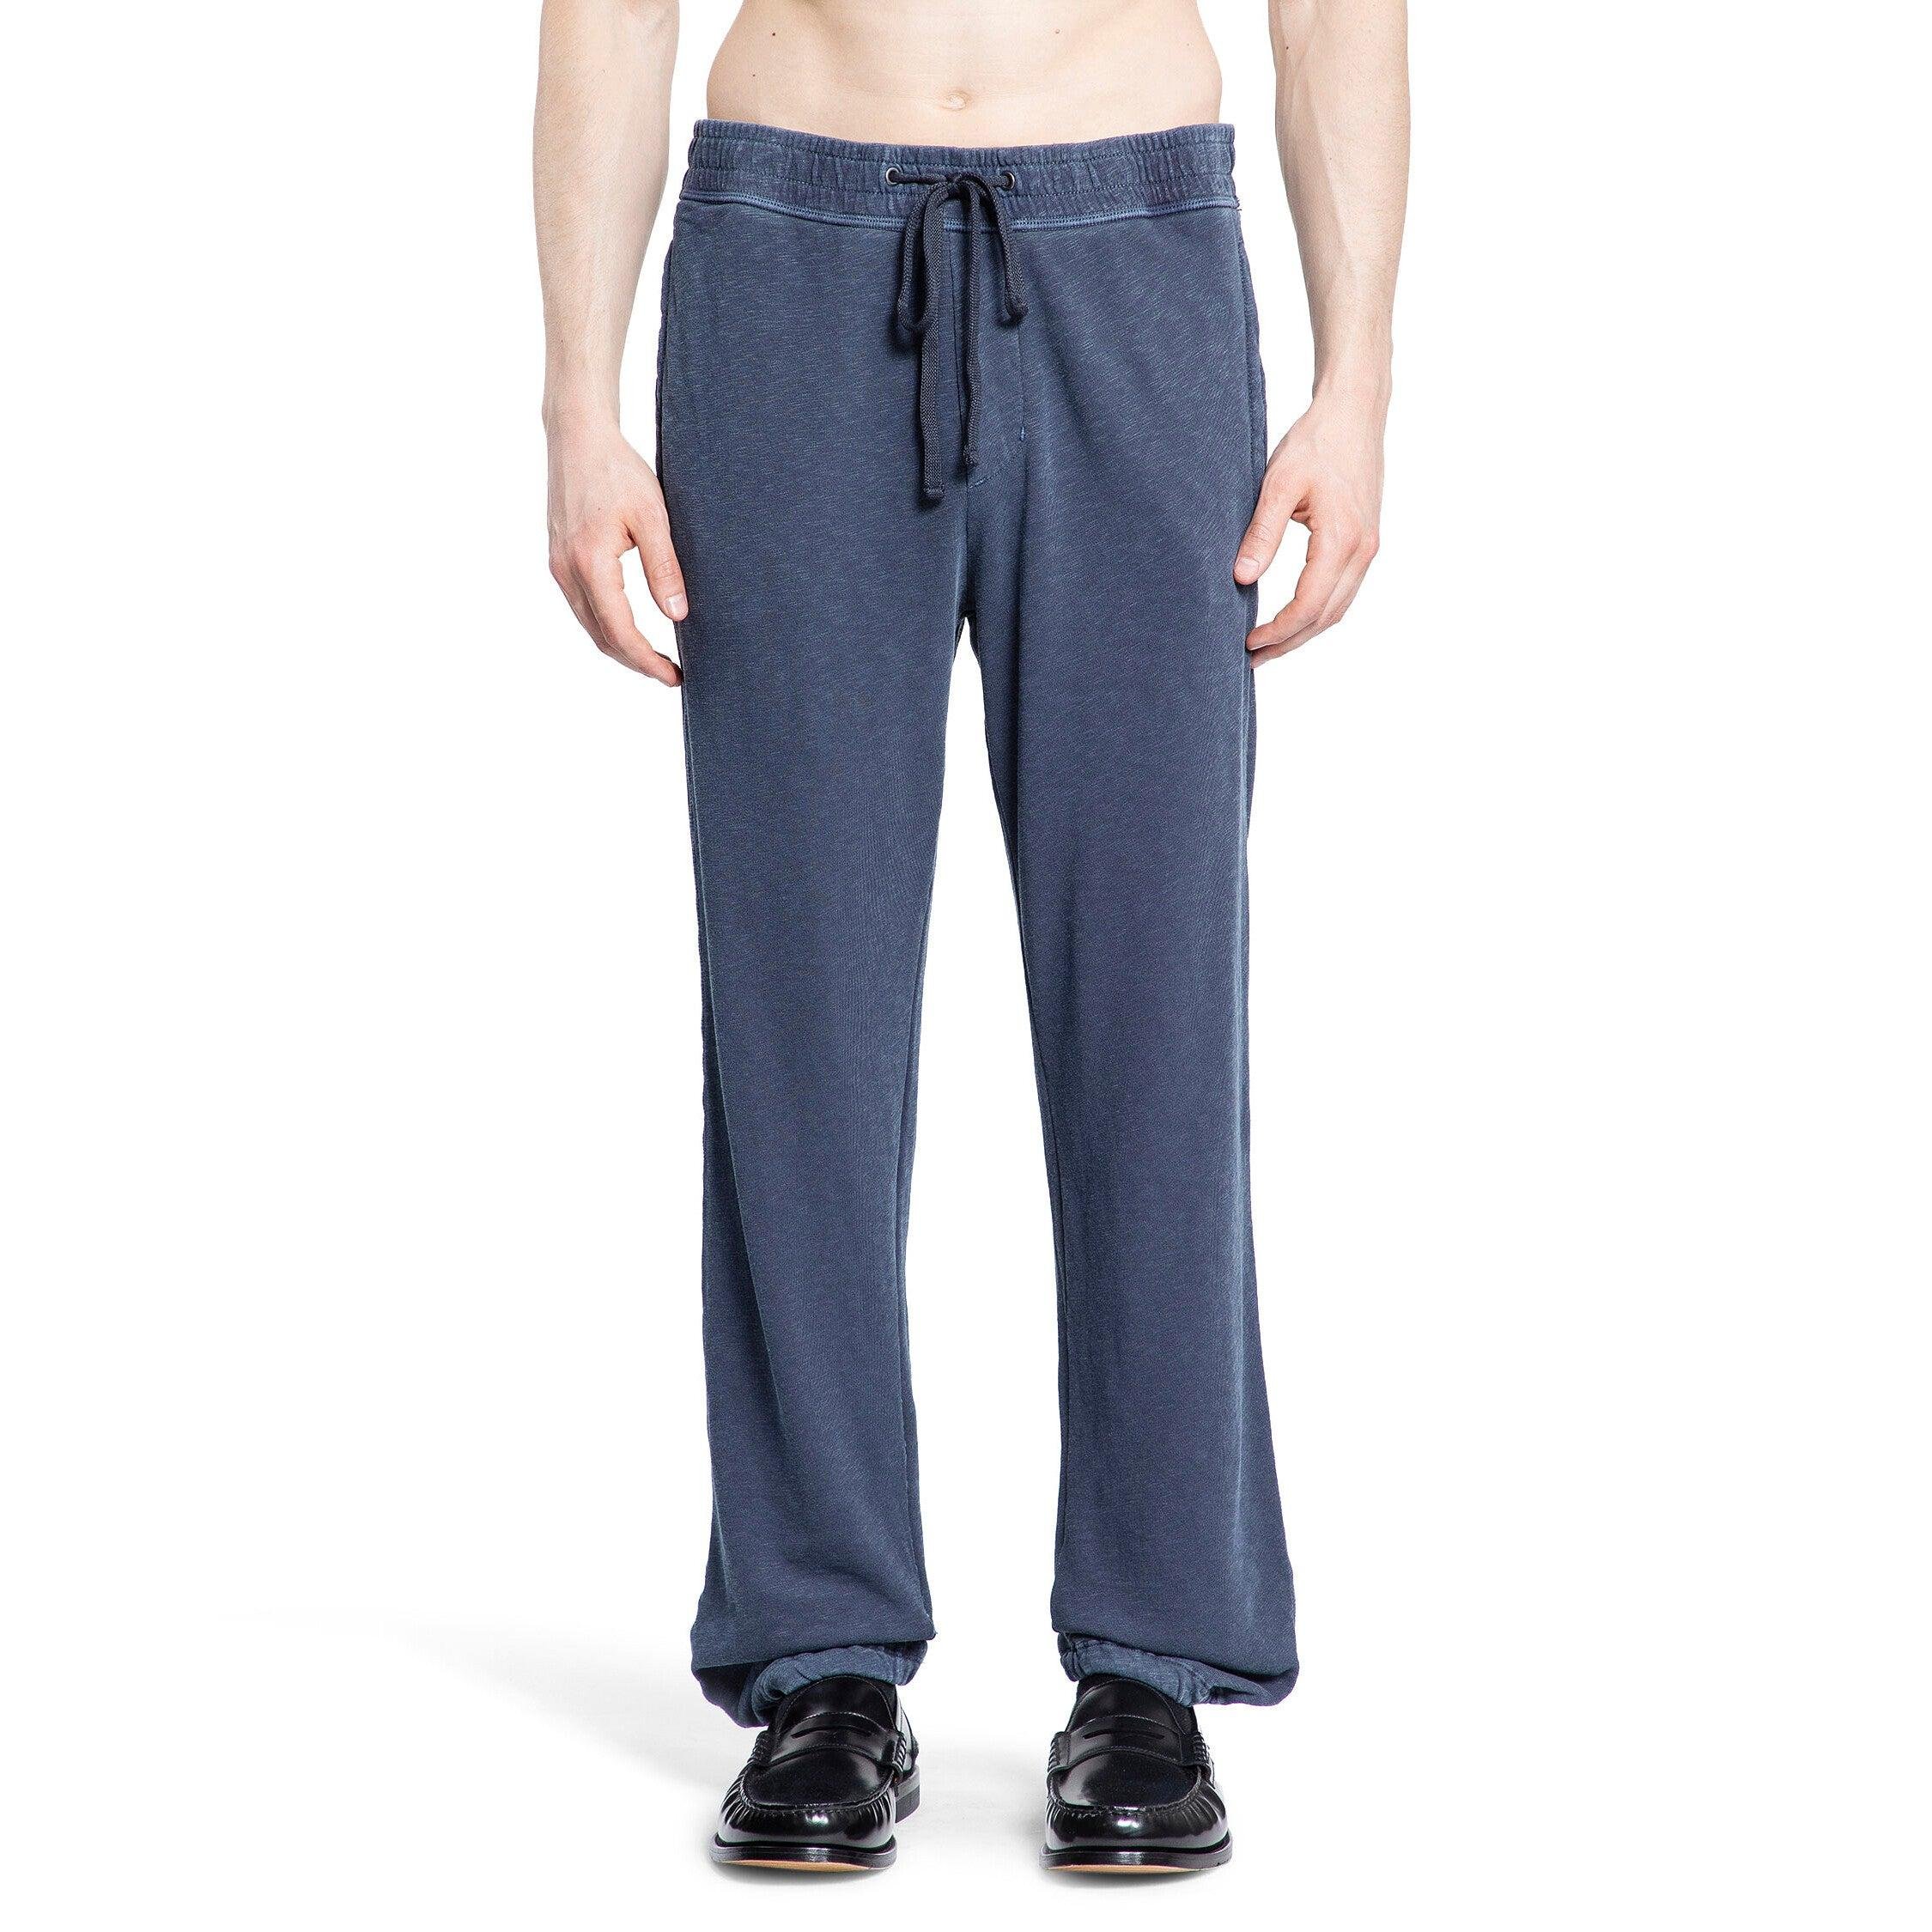 JAMES PERSE MAN BLUE TROUSERS by JAMES PERSE